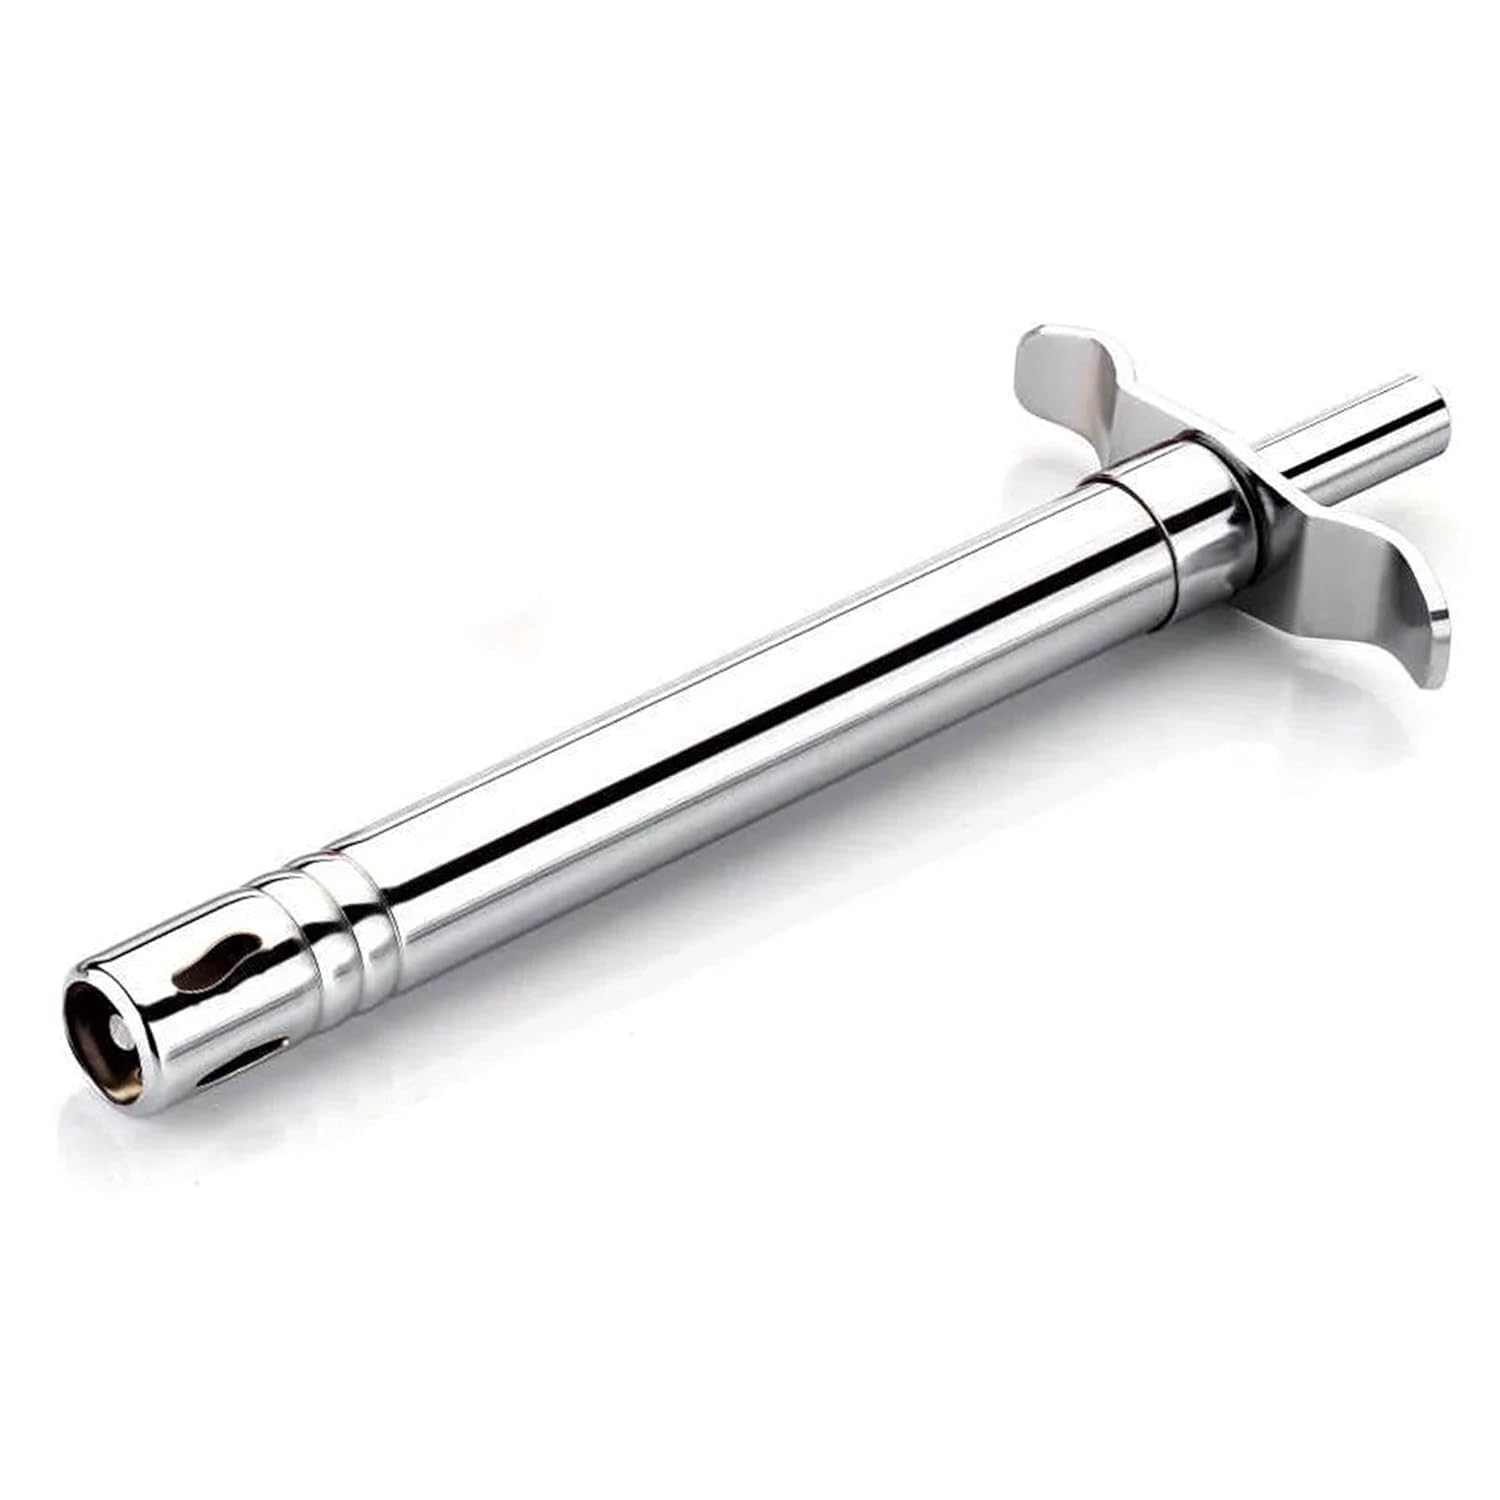 Hian Mishra's Stainless Steel Kitchen Gas Lighter - Ergonomic Design, Long-Reach Handle, Safe Ignition for Gas Stoves in Restaurants & Home Kitchens (Silver) (Metal Silver Lighter) Kitchen Tools